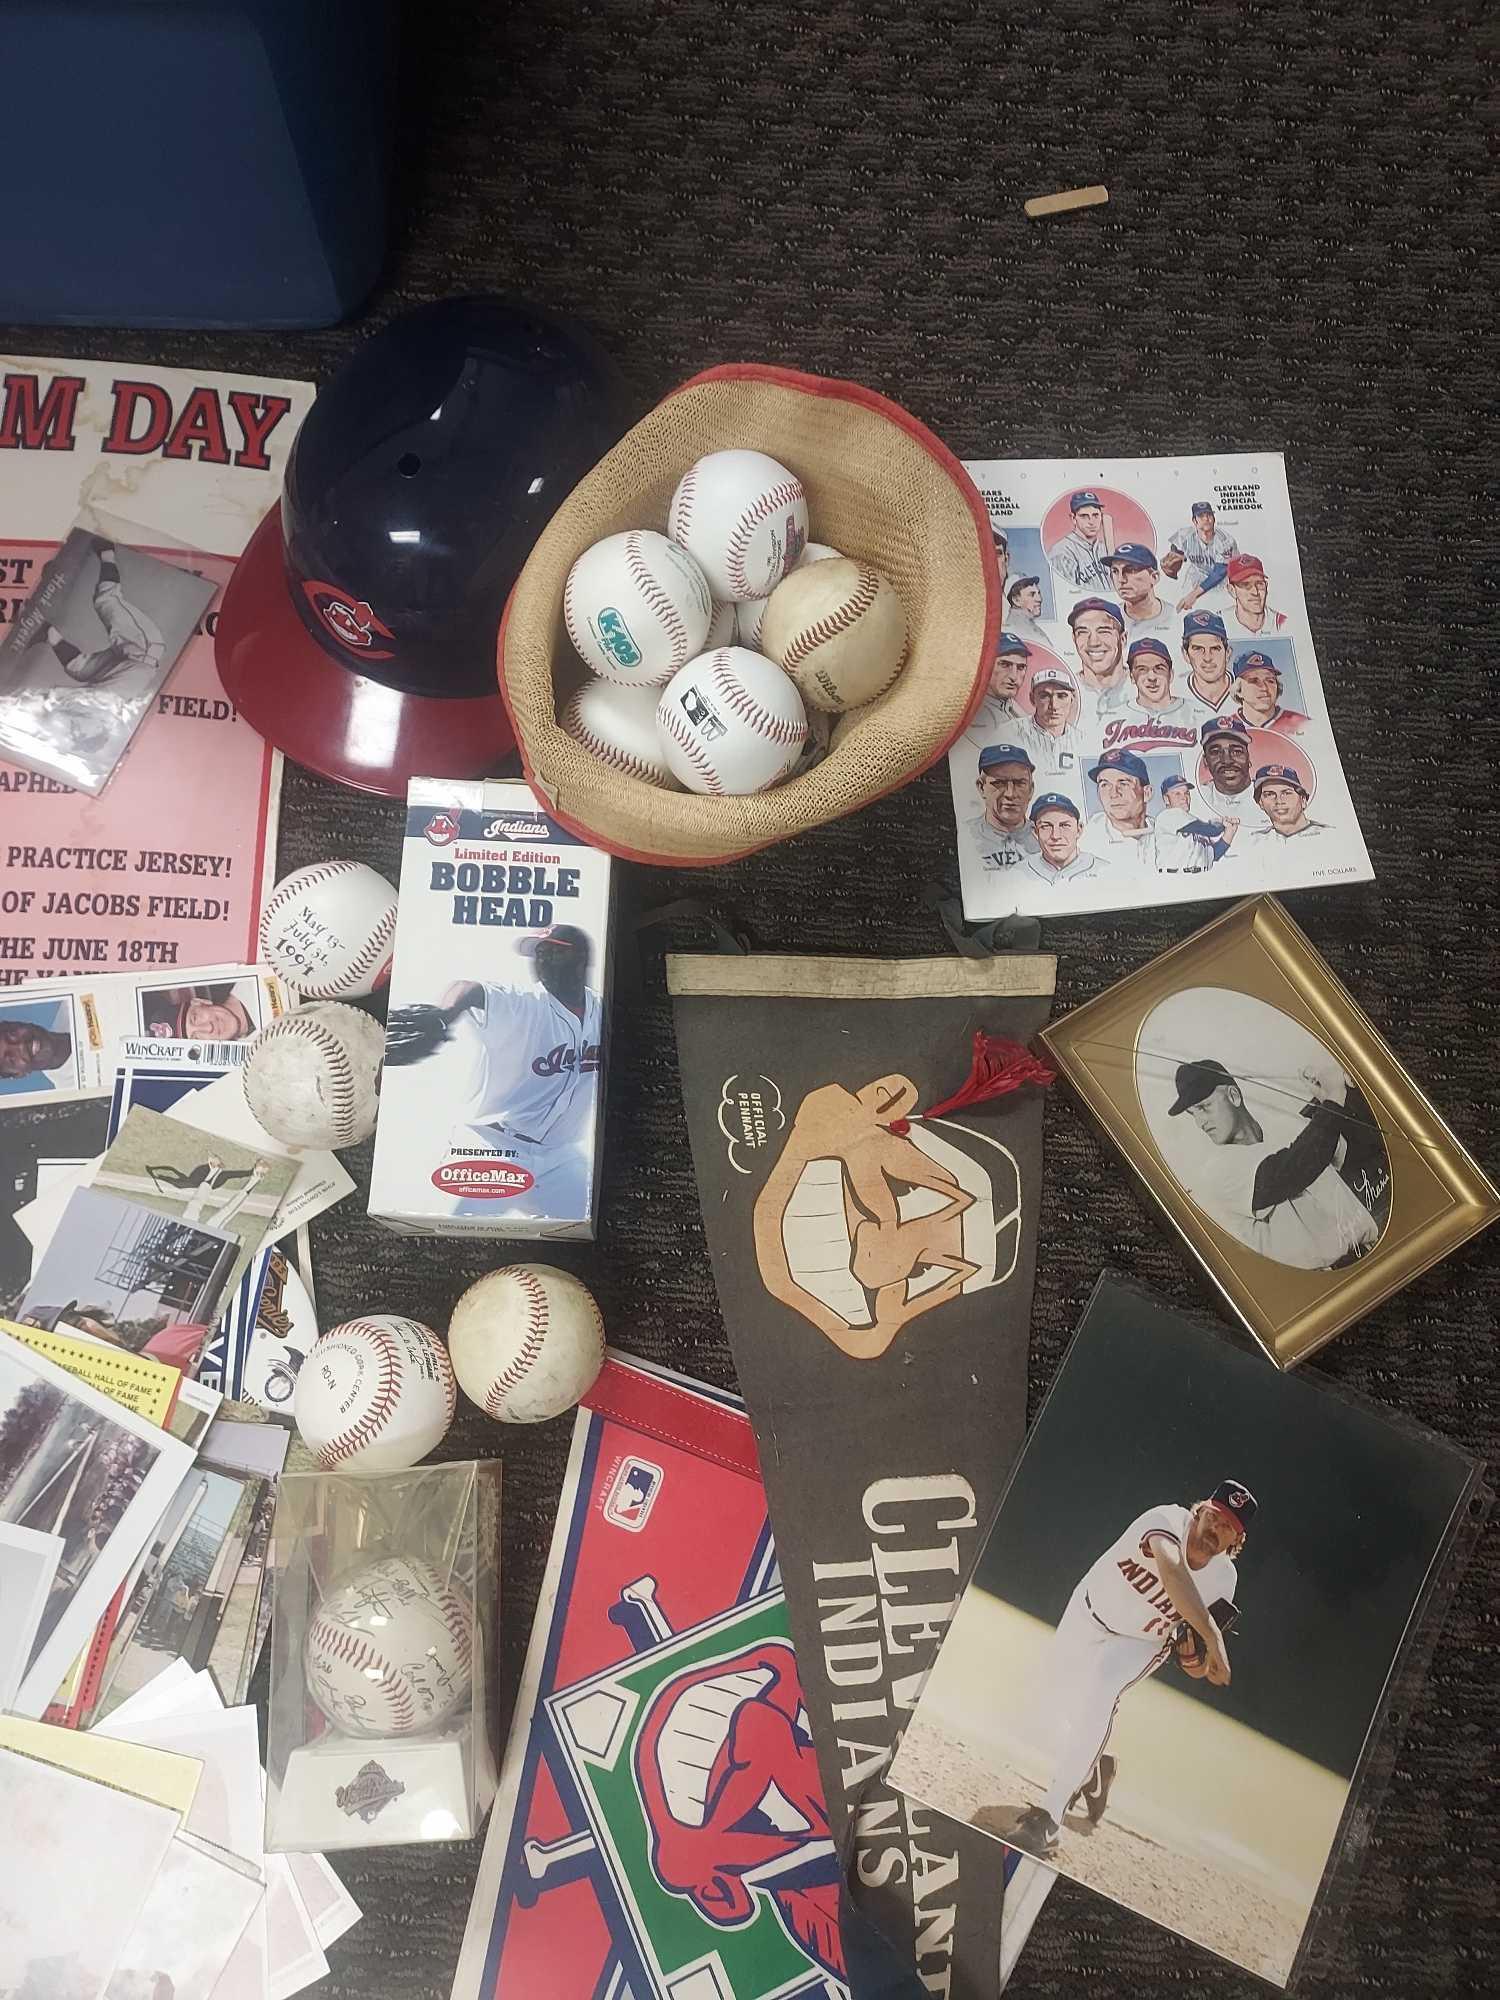 2 Large Totes of Cleveland Indians/Canton/Akron Cards, Photos, Memorabilia, & more